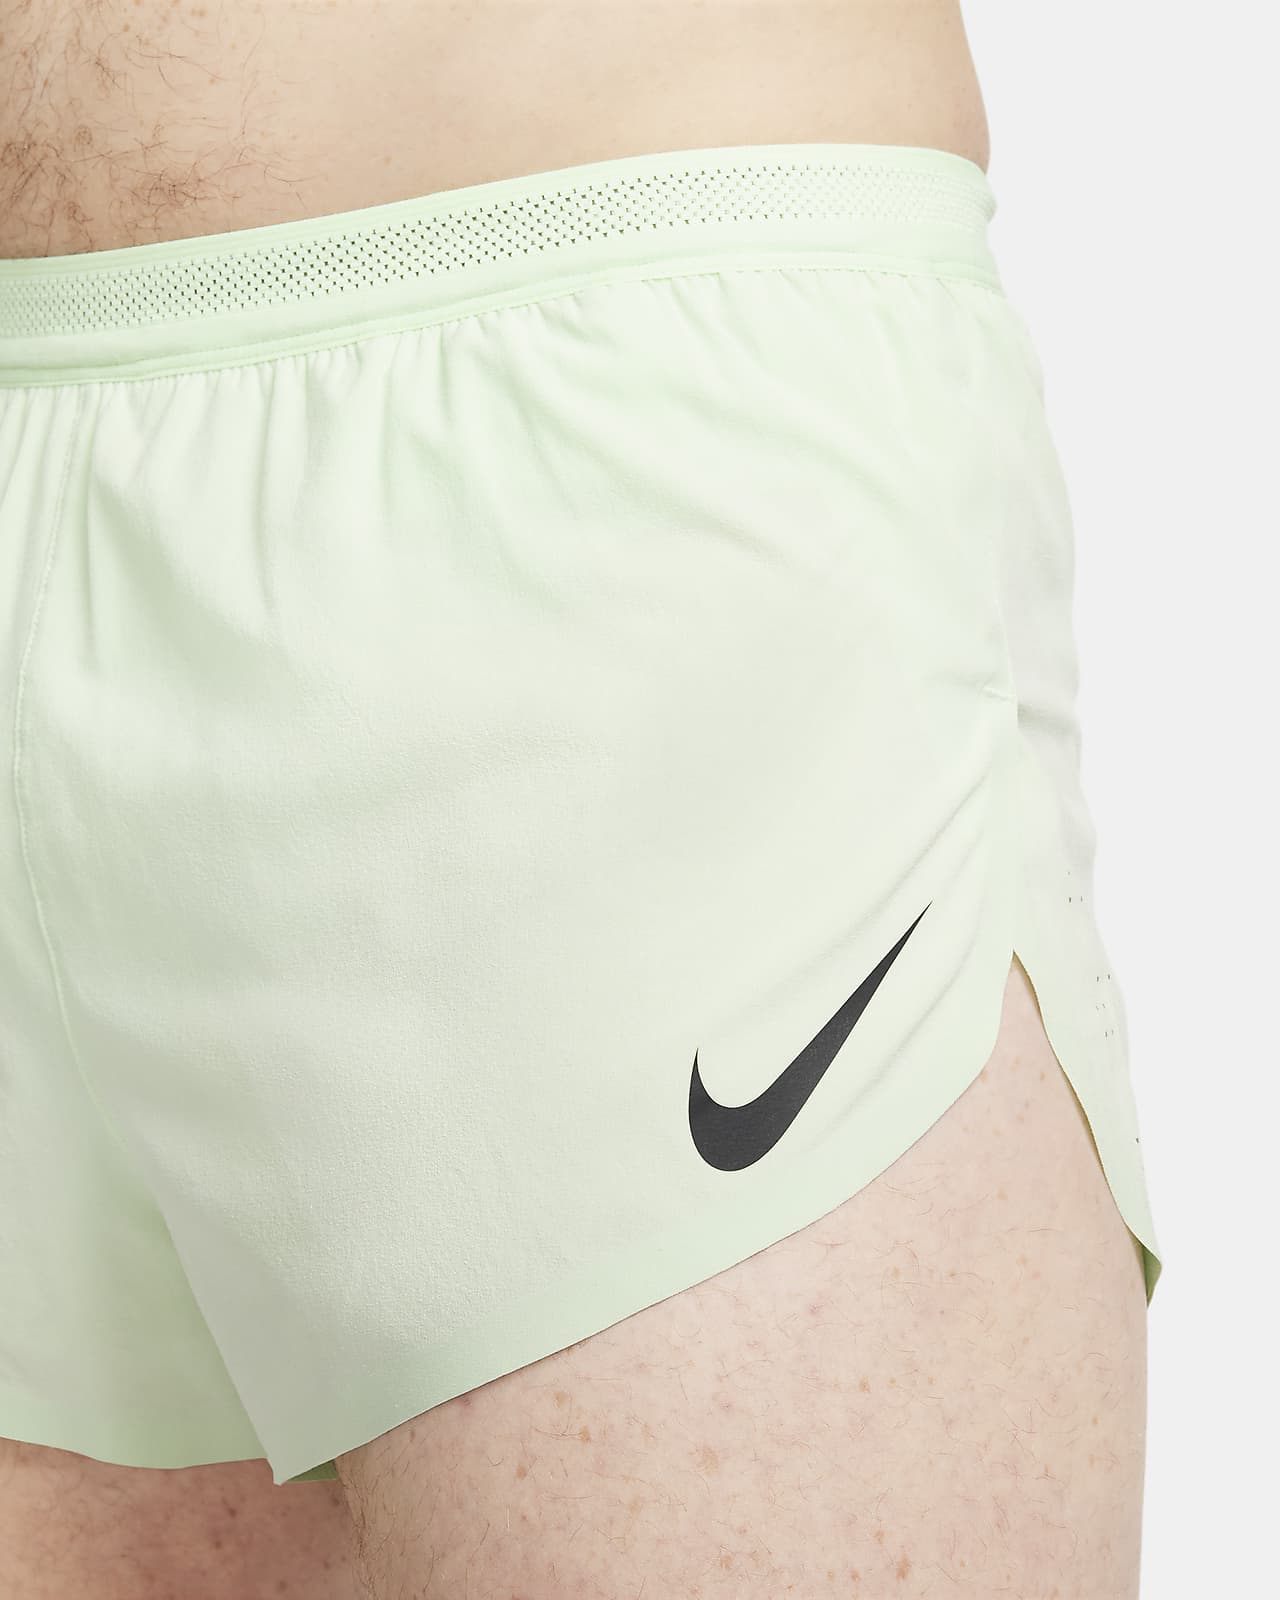 NIKE AEROSWIFT MEN'S DRI-FIT ADV 4 BRIEF-LINED RUNNING SHORTS BLACK/SUMMIT  WHITE – Park Outlet Ph